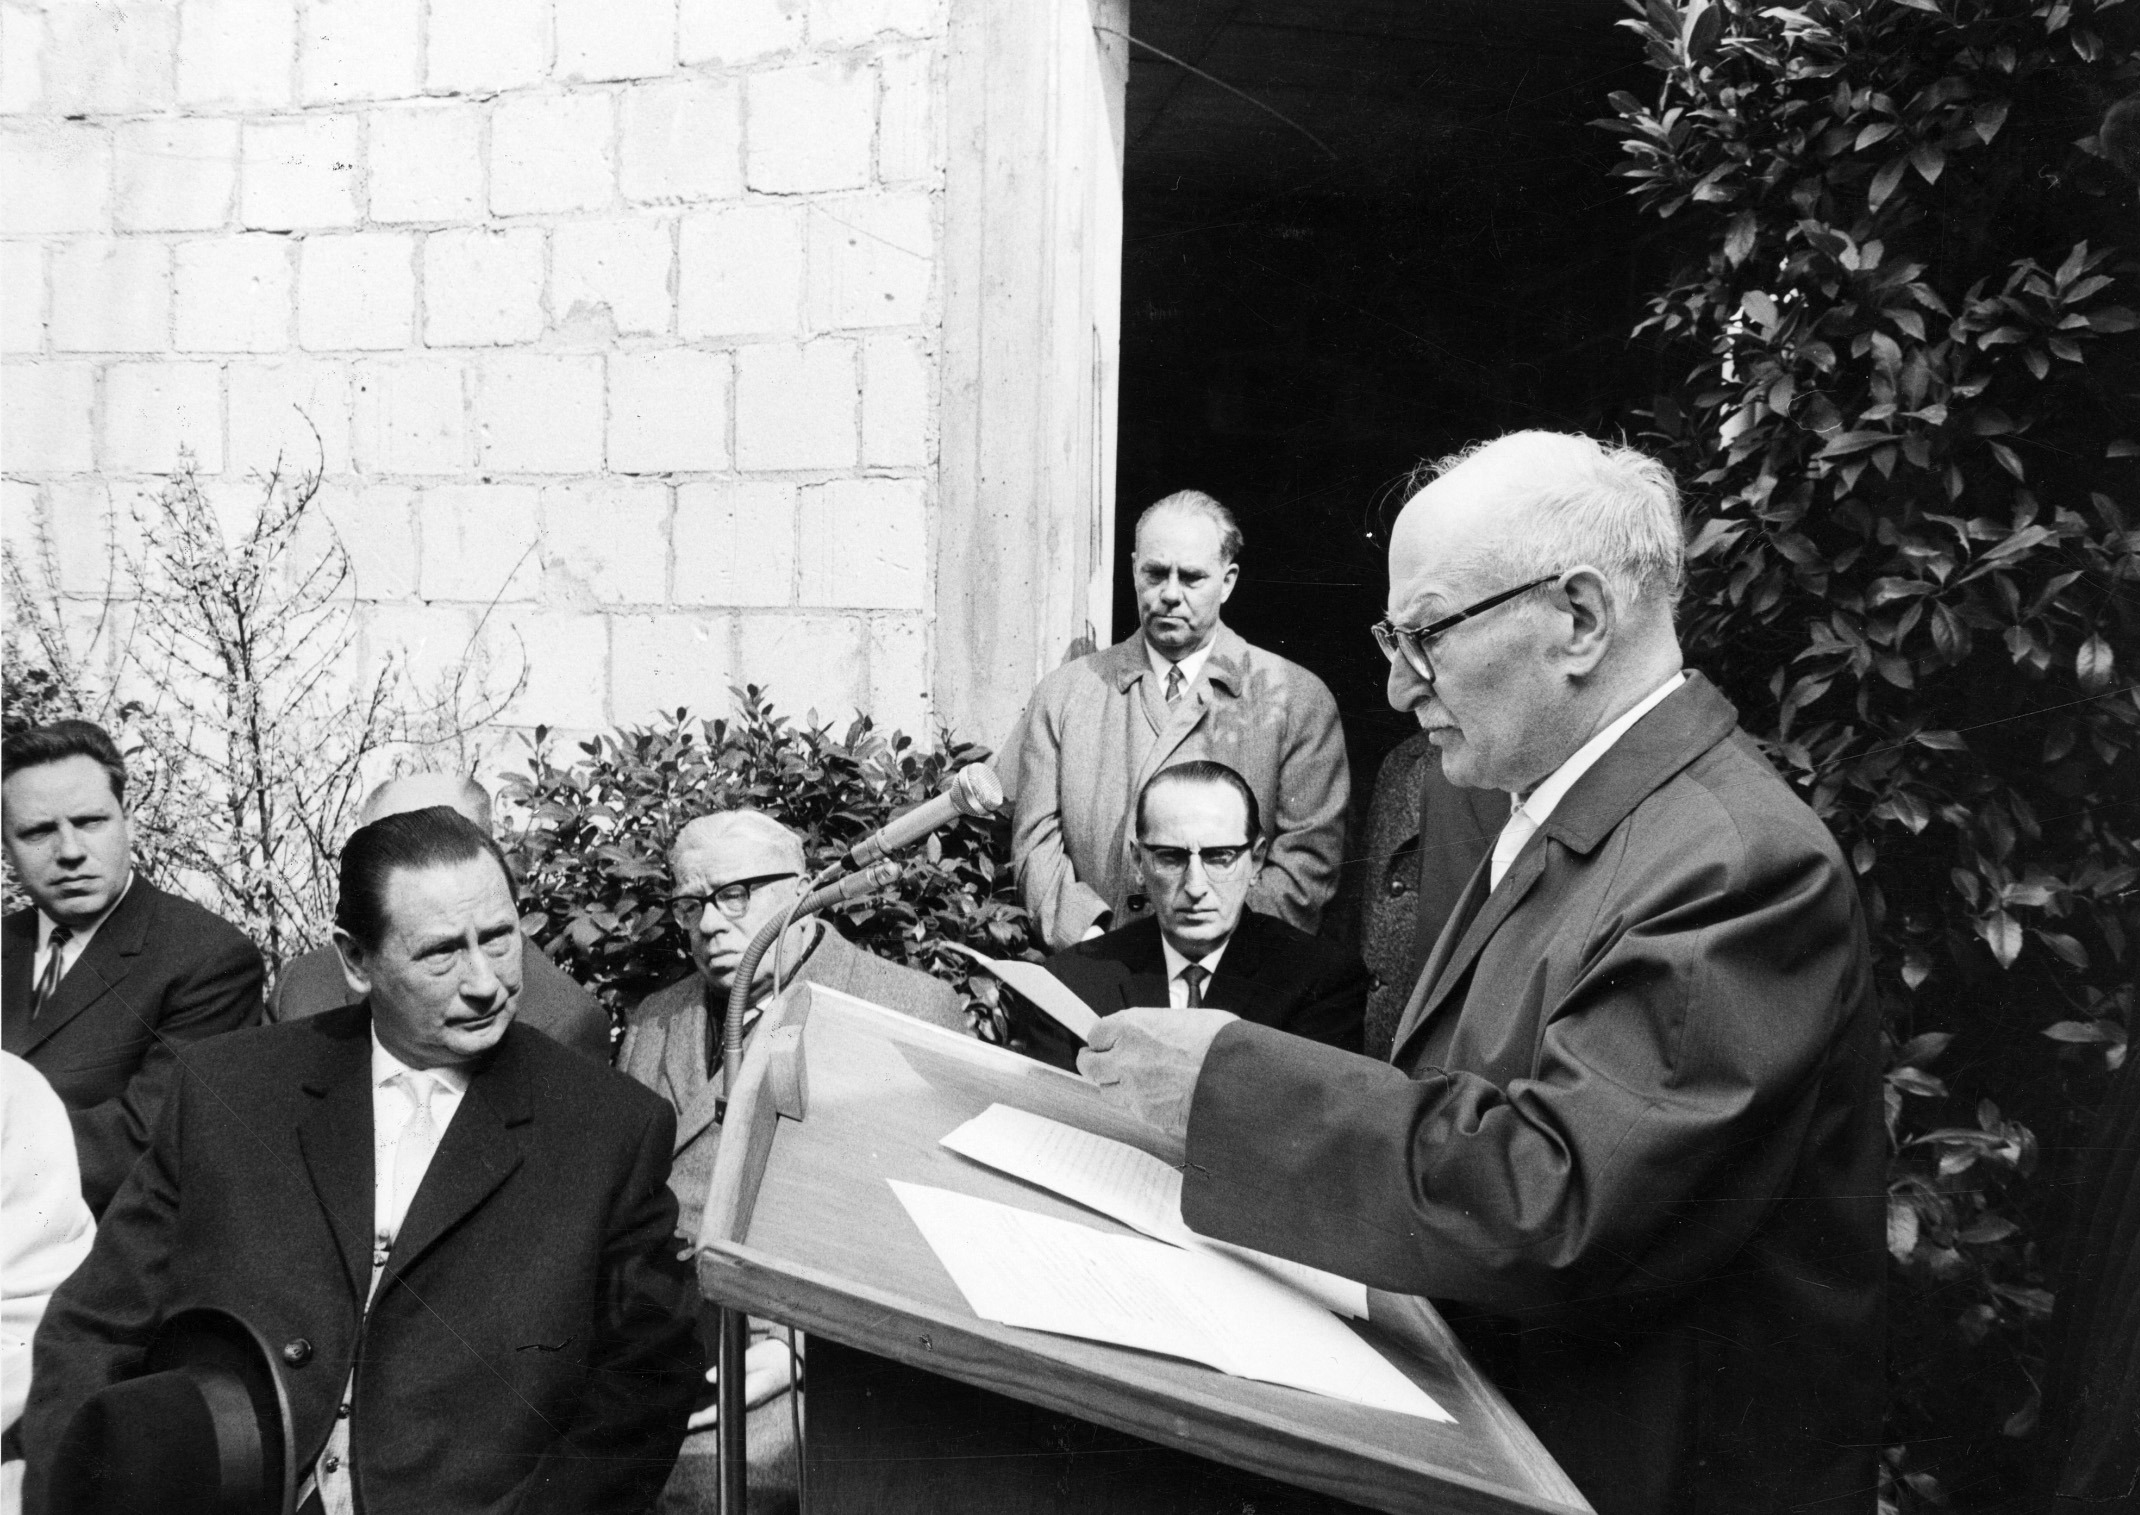 Dr. Friedrich Reichmann, chairman of the Wiesbaden Jewish Community, opens the ceremonial laying of the cornerstone for the new synagogue building. Seated on the left: Wilhelm Freund. StadtA WI, F000-259